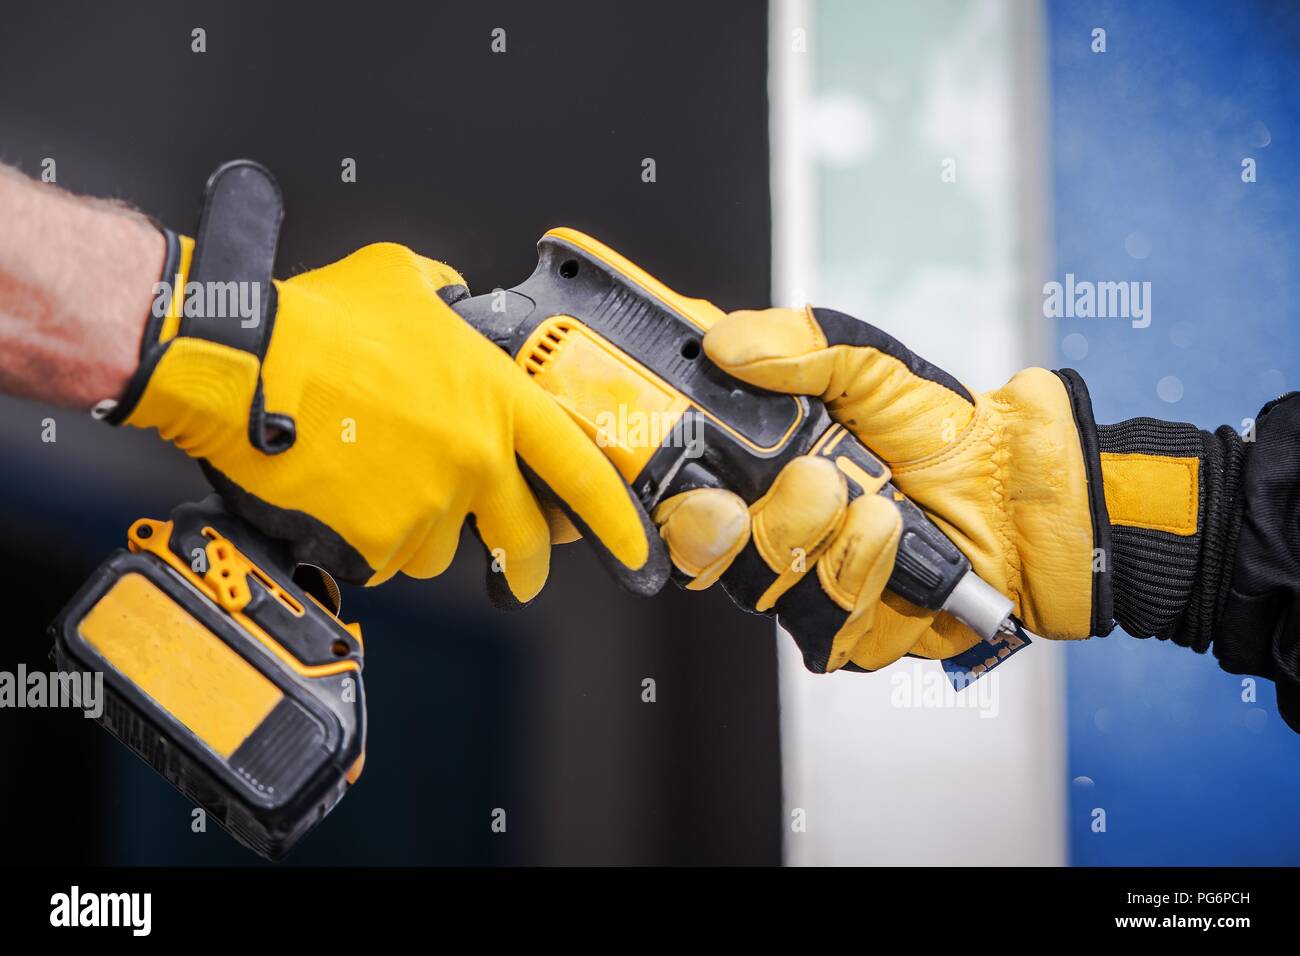 Sharing Construction Equipment Between Two Contractors in Safety Gloves. Closeup Photo. Drill Driver. Stock Photo